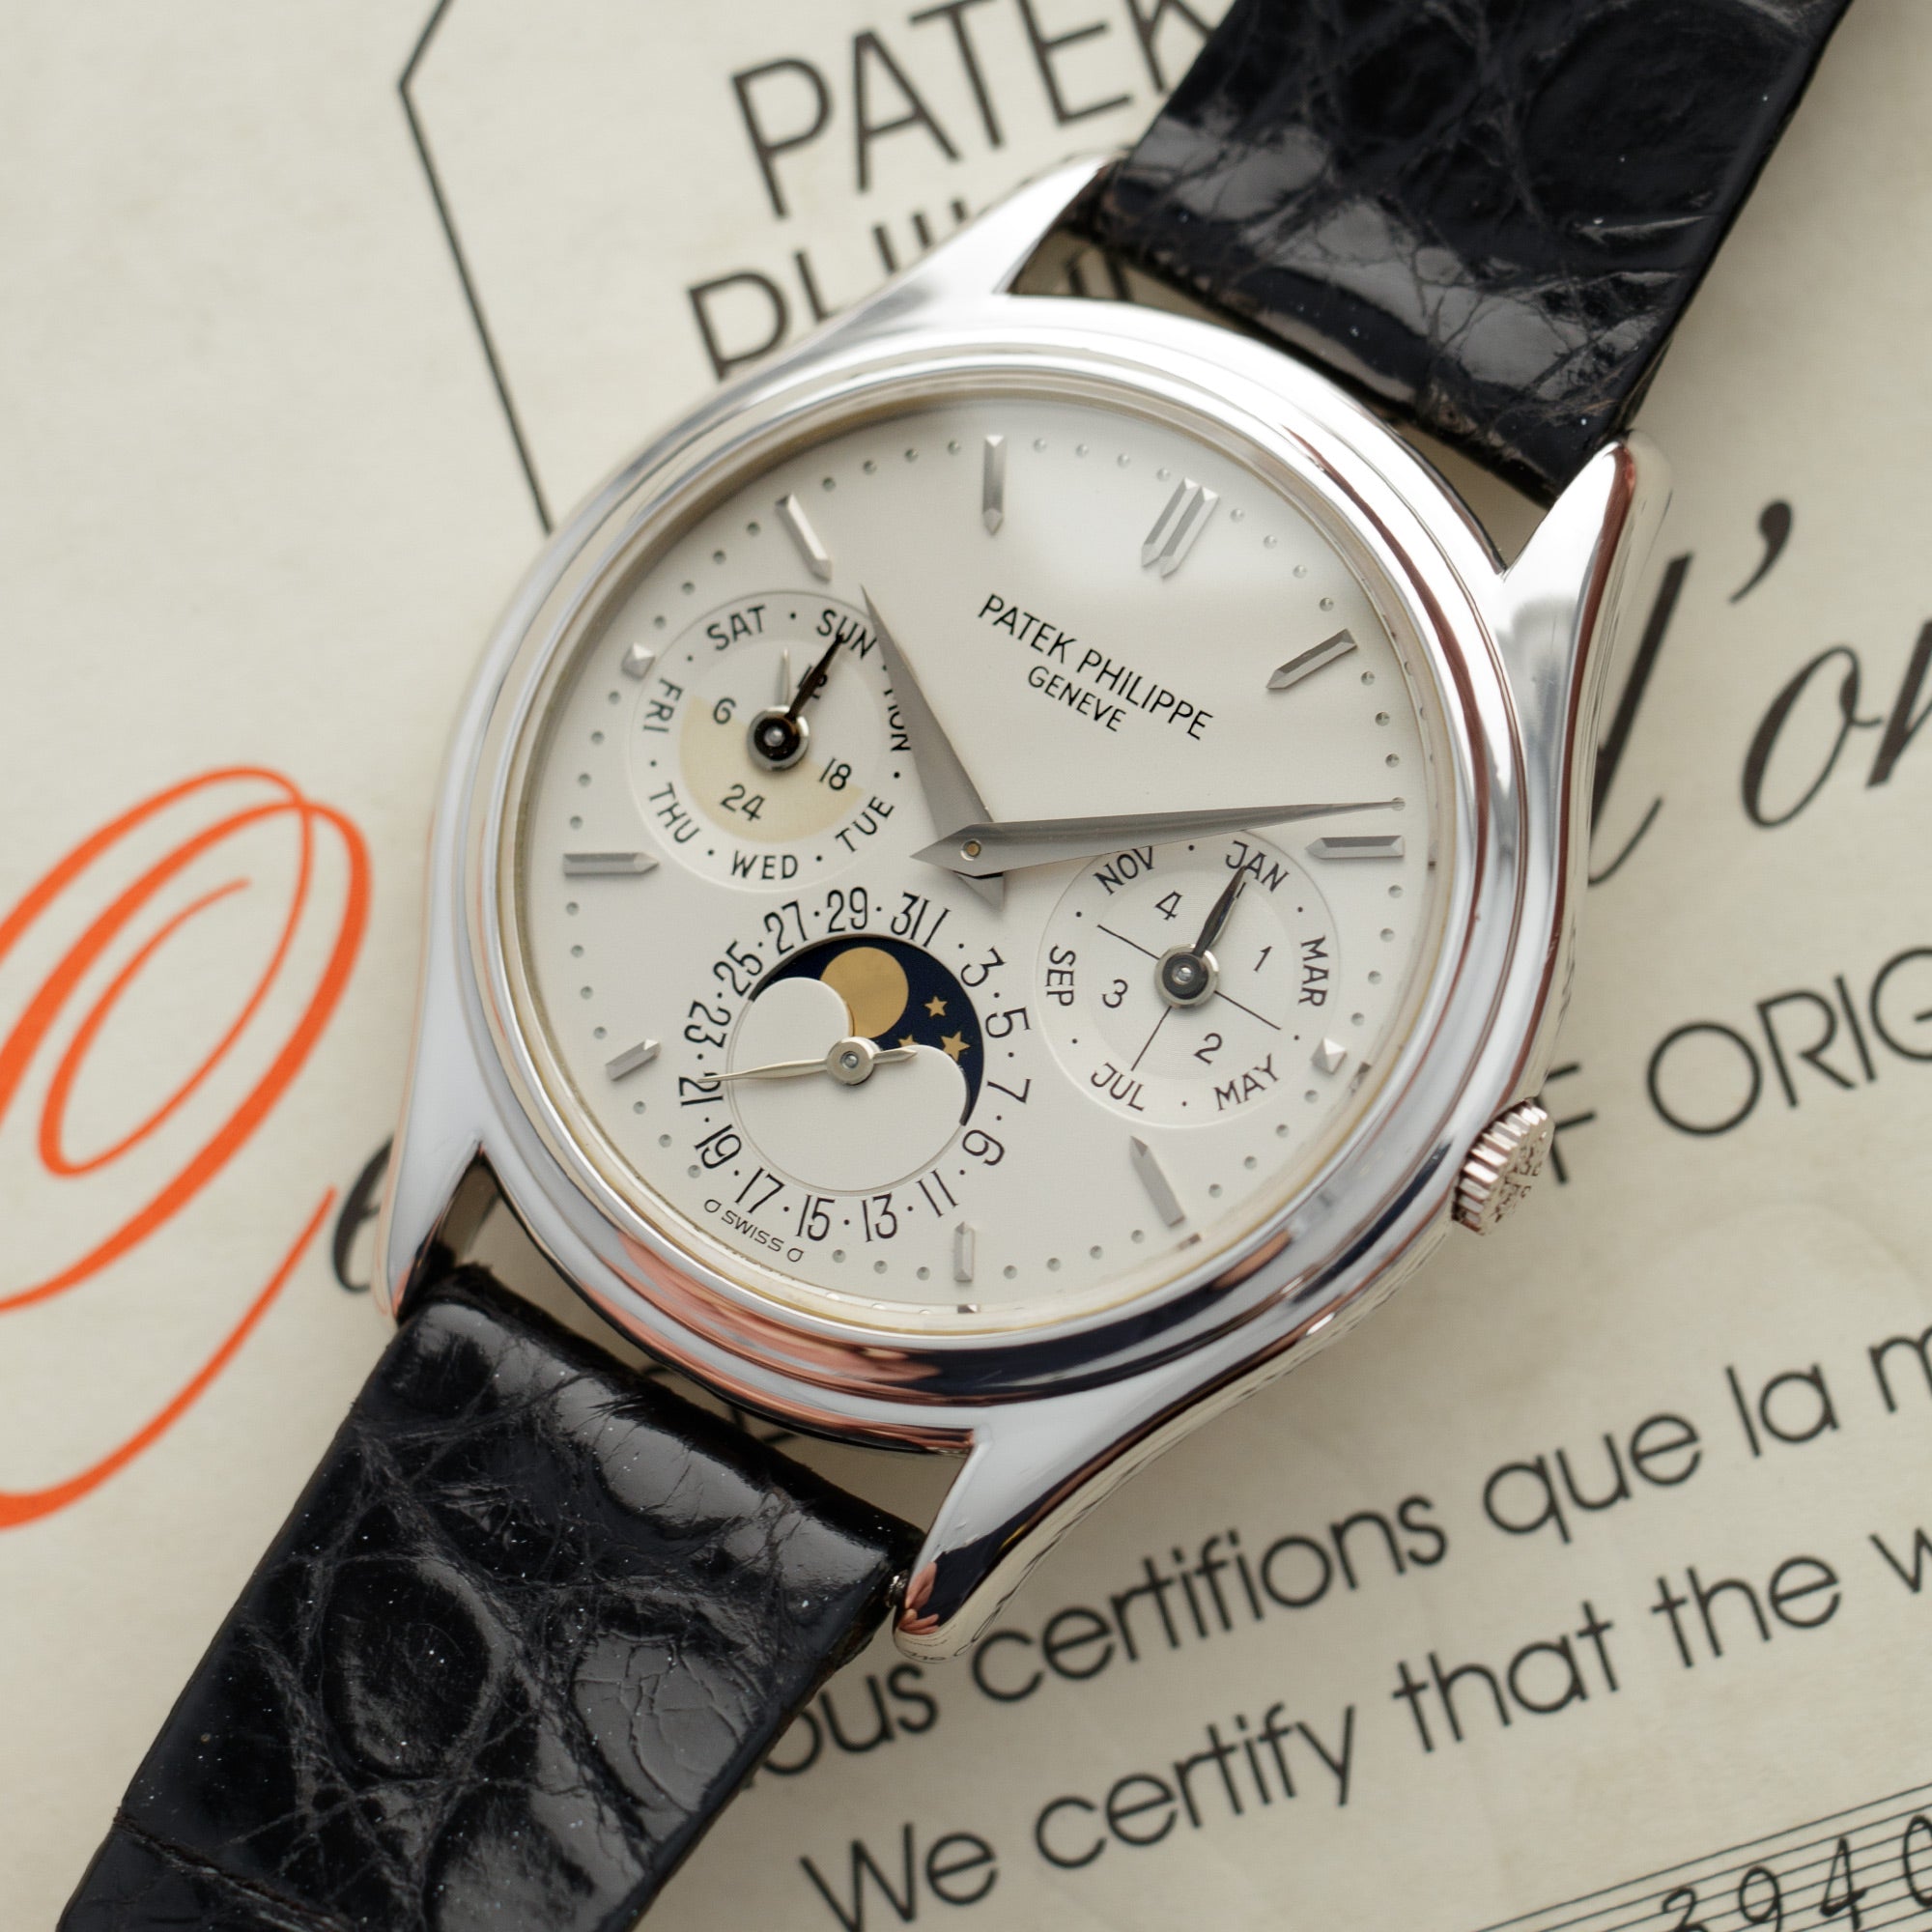 Patek Philippe - Patek Philippe Platinum Perpetual Ref. 3940 with Box and Papers - The Keystone Watches